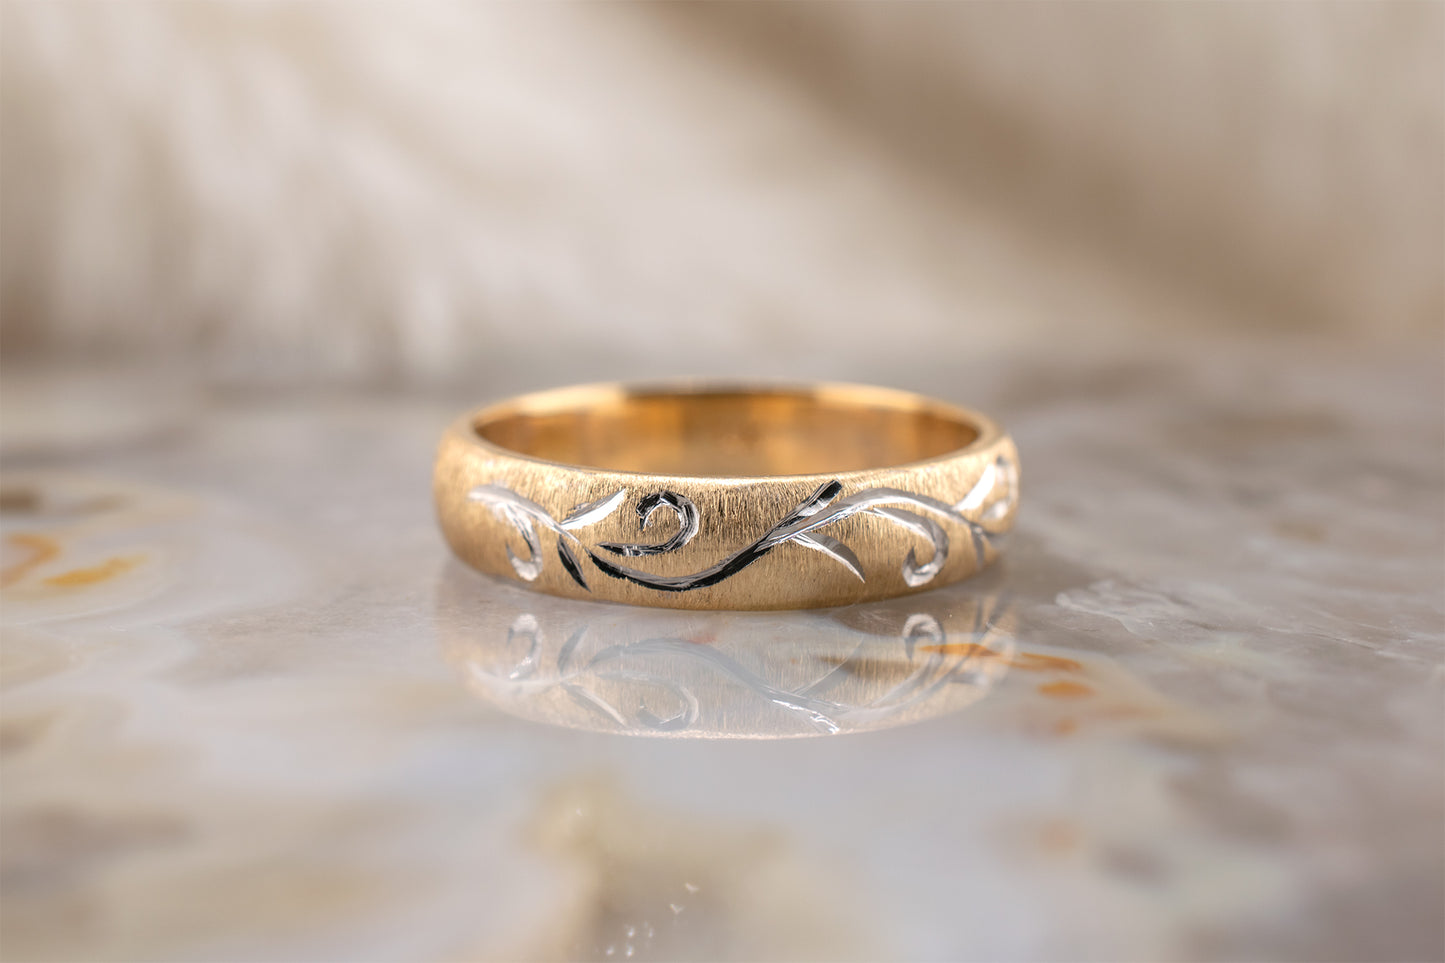 Circa 1990s Minimalist Vintage Two Tone Yellow Gold Satin Brushed Finish Band with White Gold Hand Carved Scroll Design Size 5.75 4.1mm